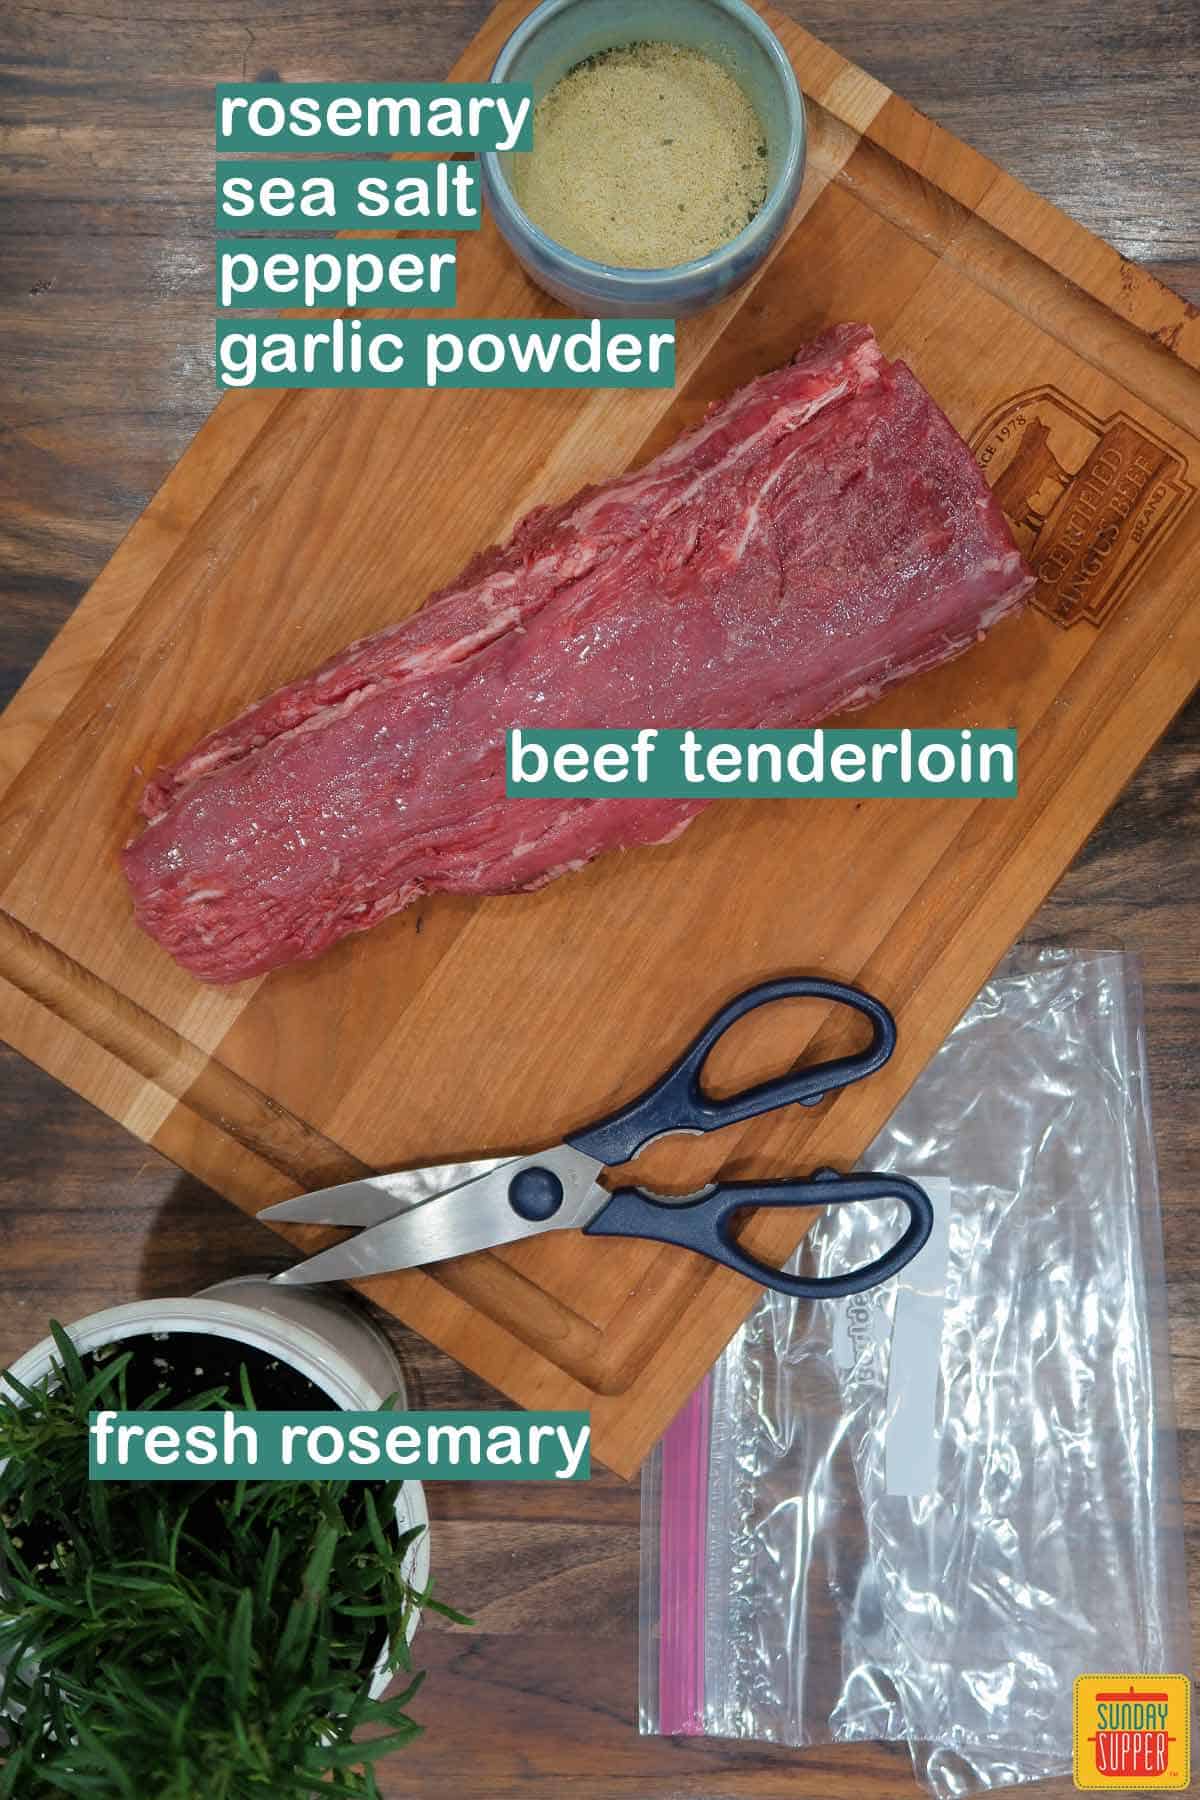 Ingredients to make sous vide beef tenderloin labeled on a table with scissors and plastic bags